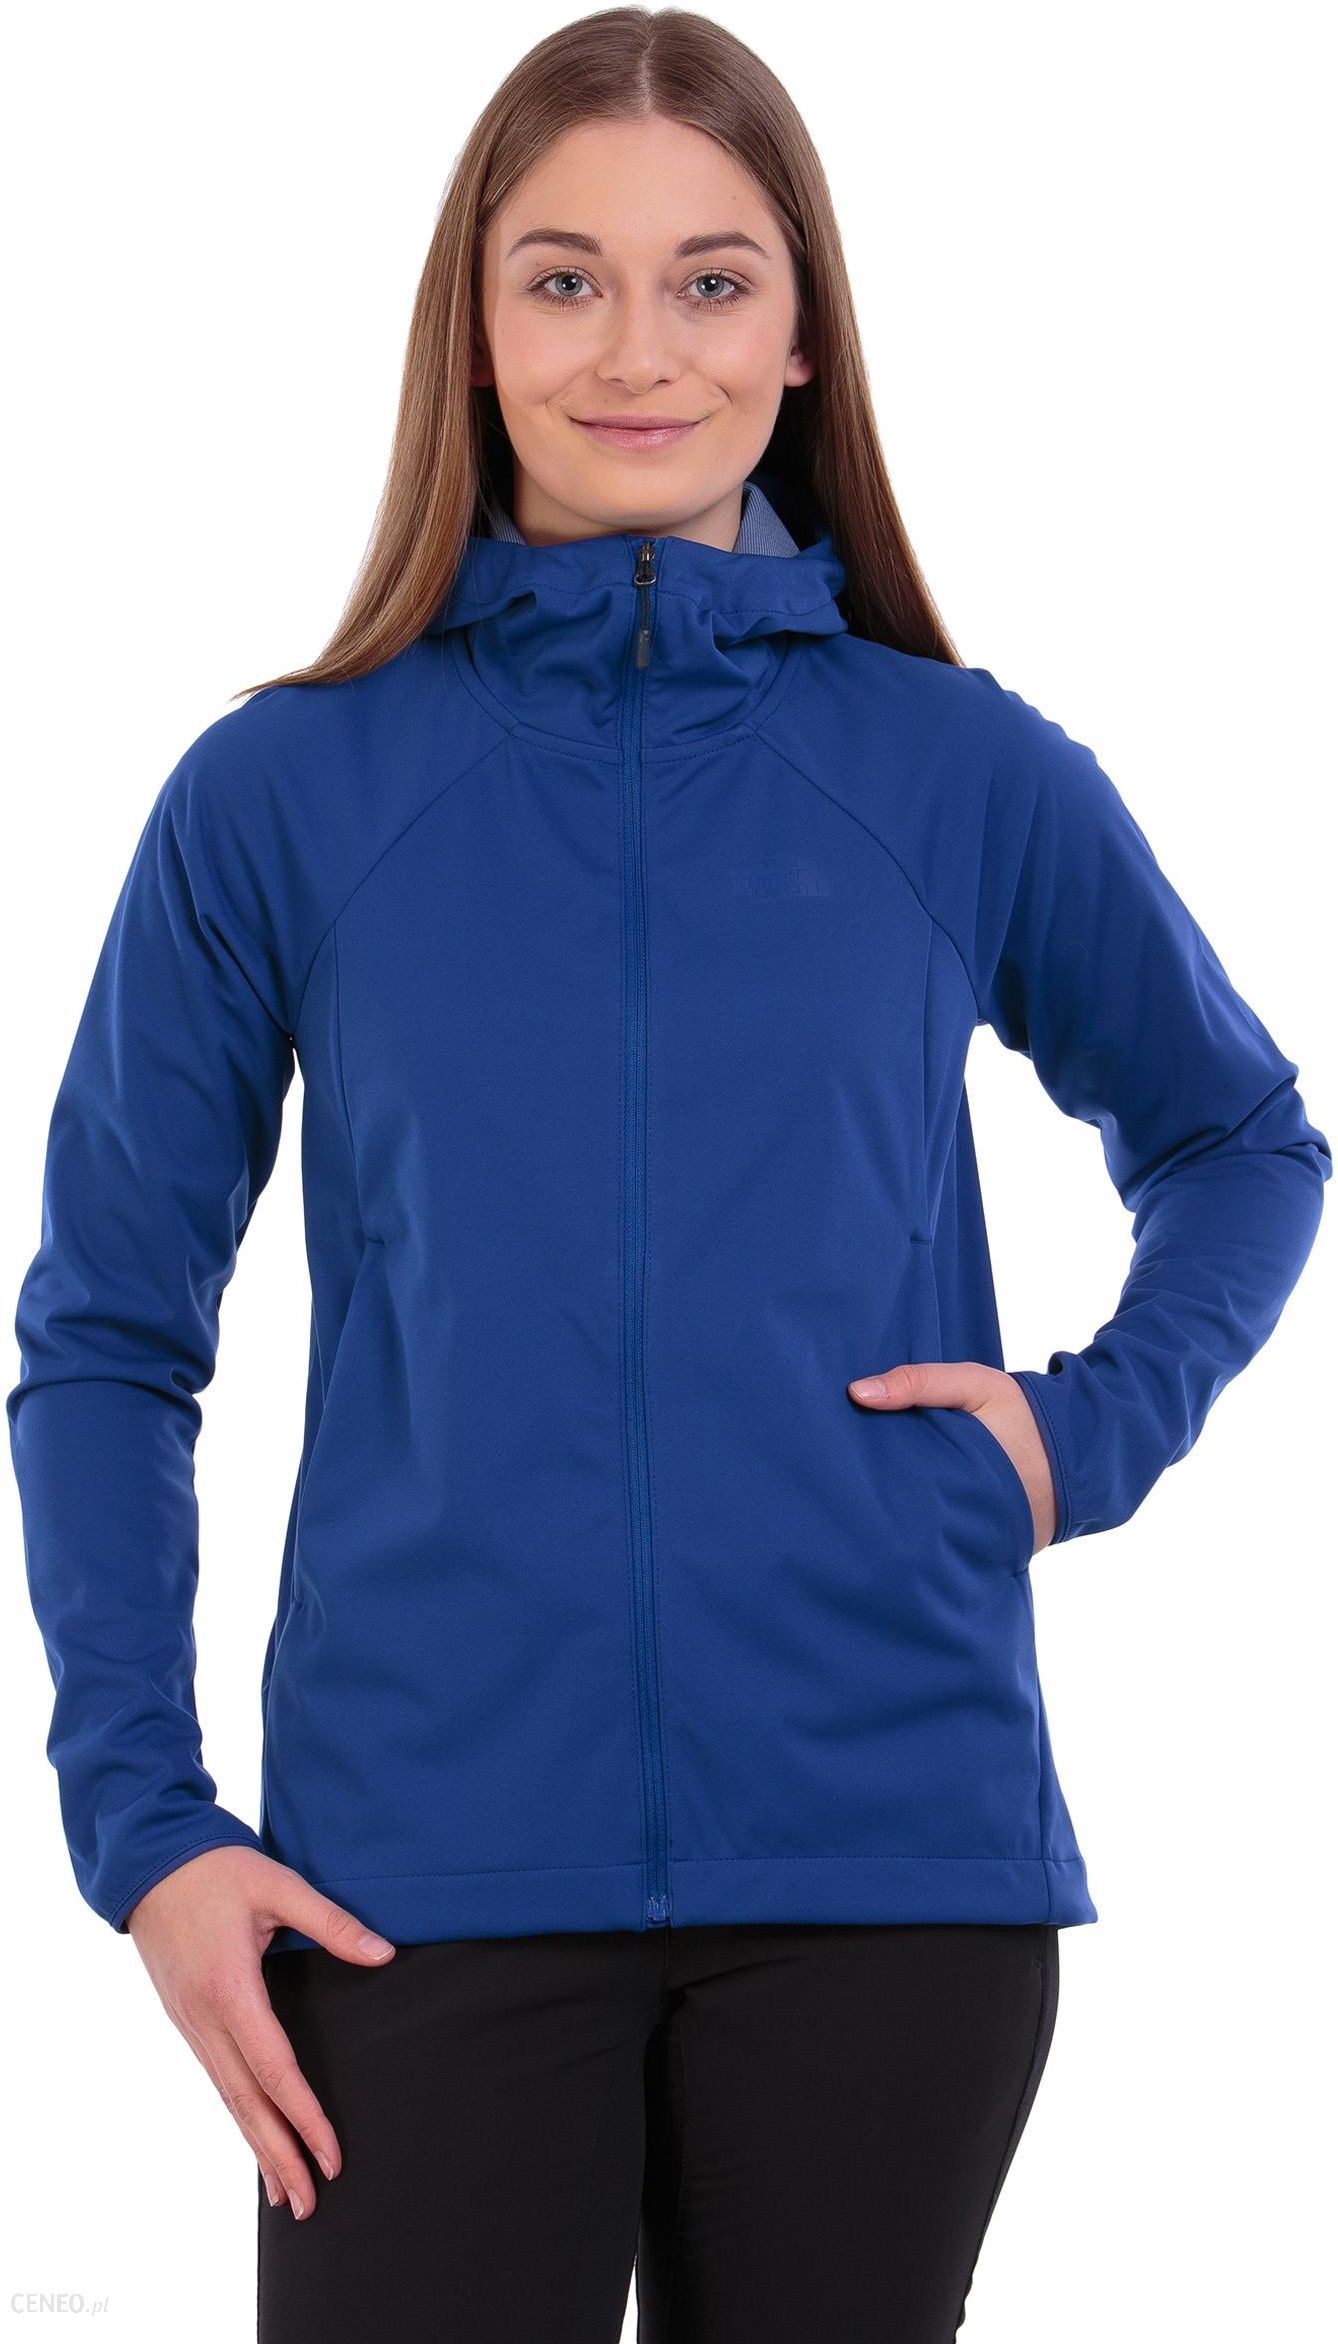 the north face women's inlux softshell jacket